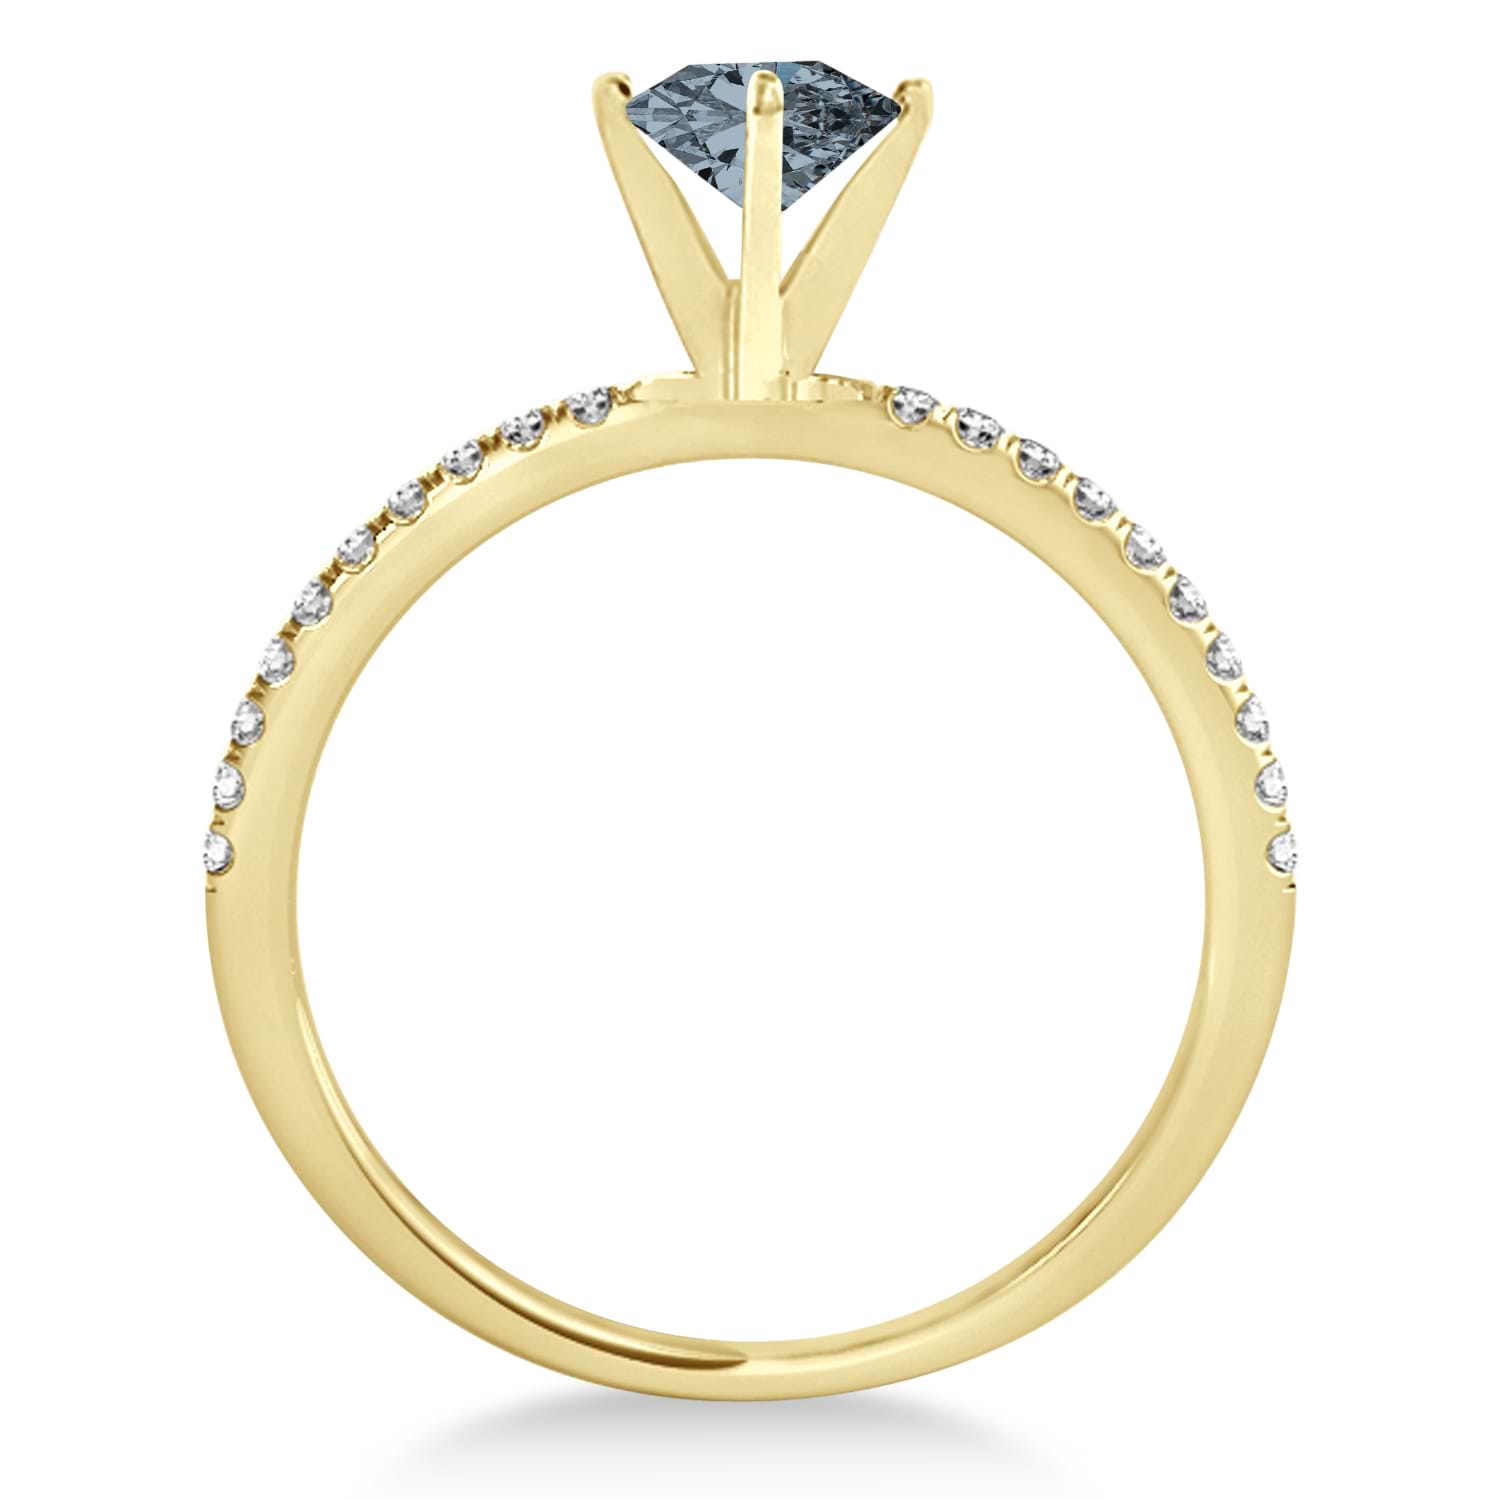 Gray Spinel & Diamond Accented Oval Shape Engagement Ring 14k Yellow Gold (1.00ct)